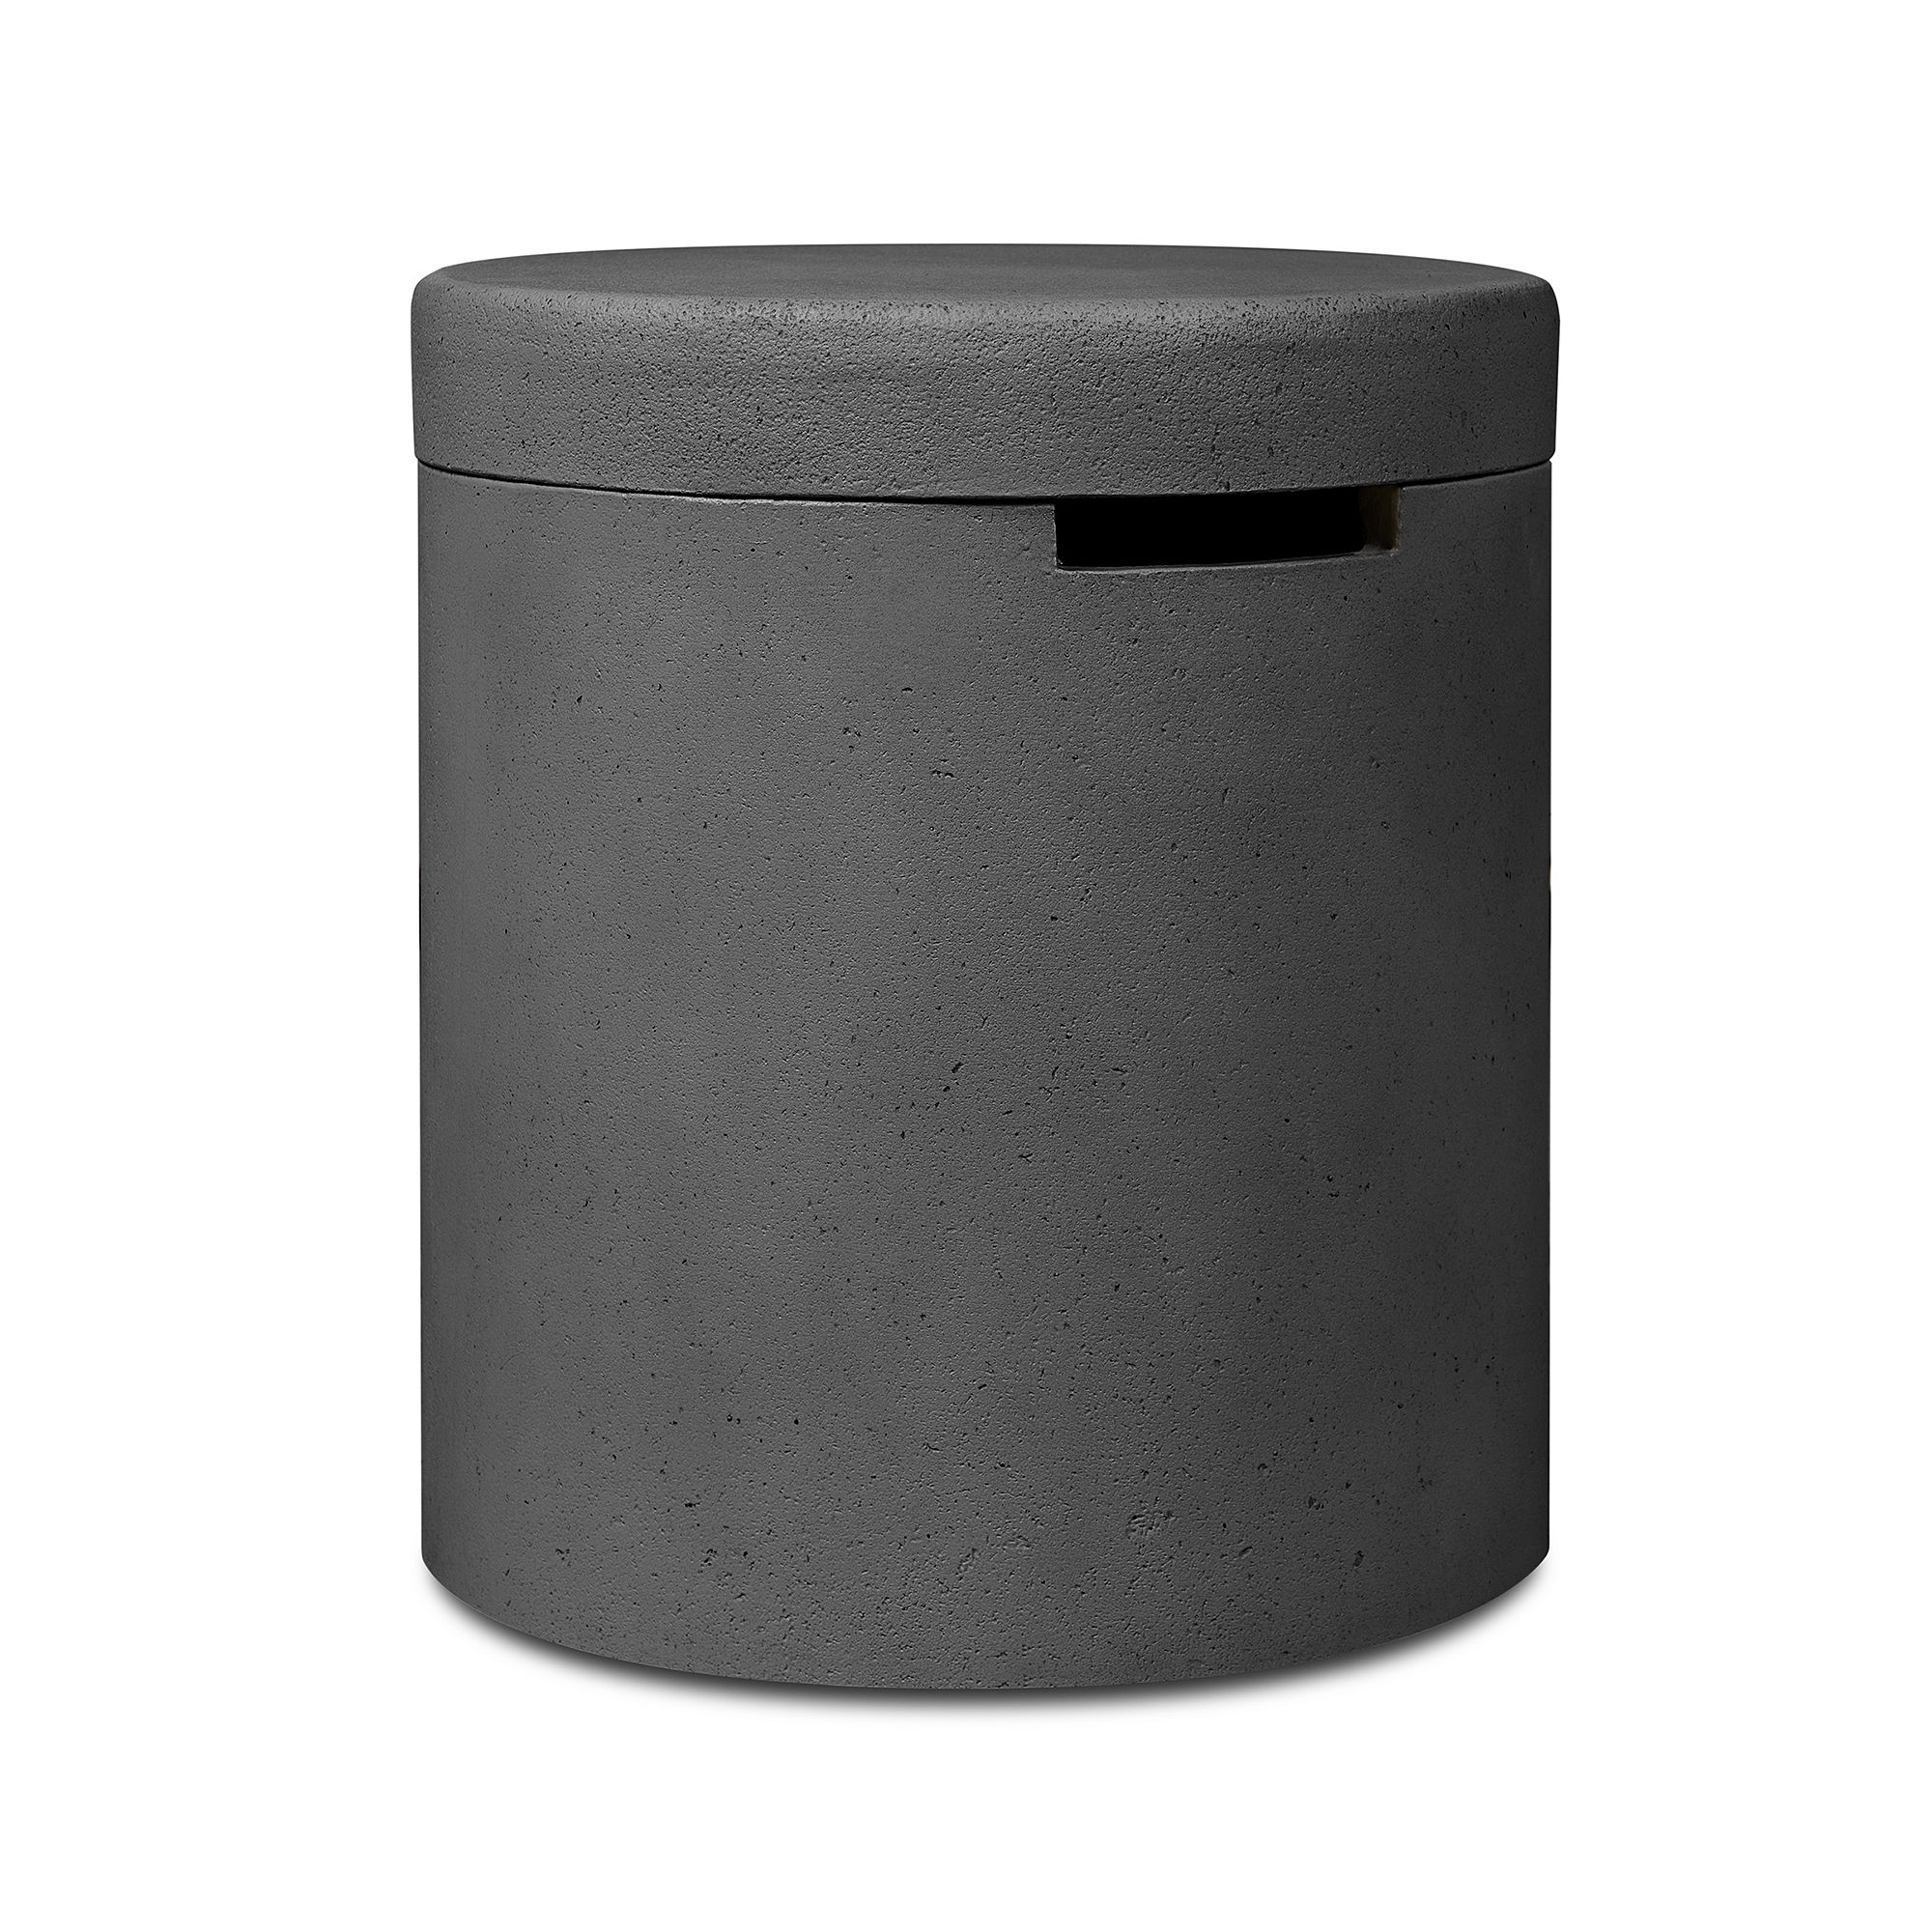 Xia Round Propane Tank Cover & Side Table | West Elm